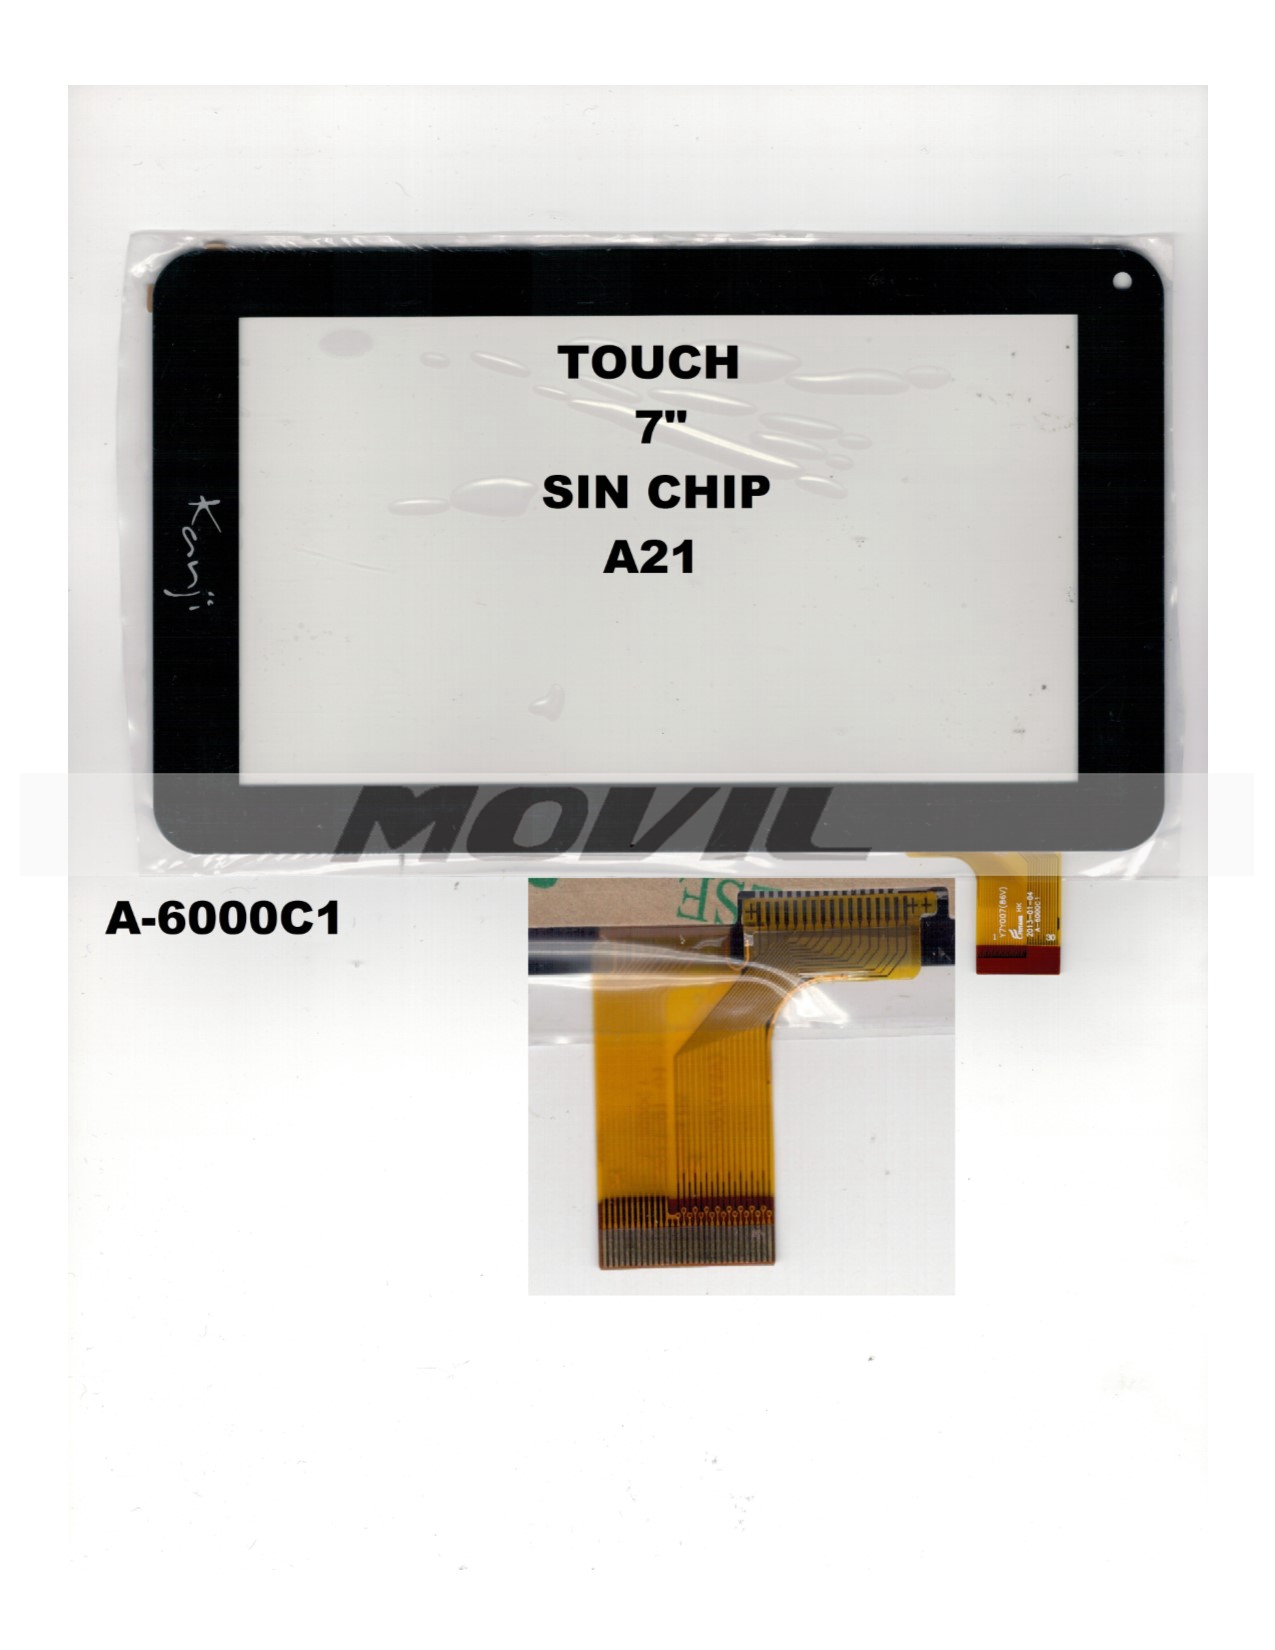 Touch tactil para tablet flex 7 inch SIN CHIP A21 A-6000C1